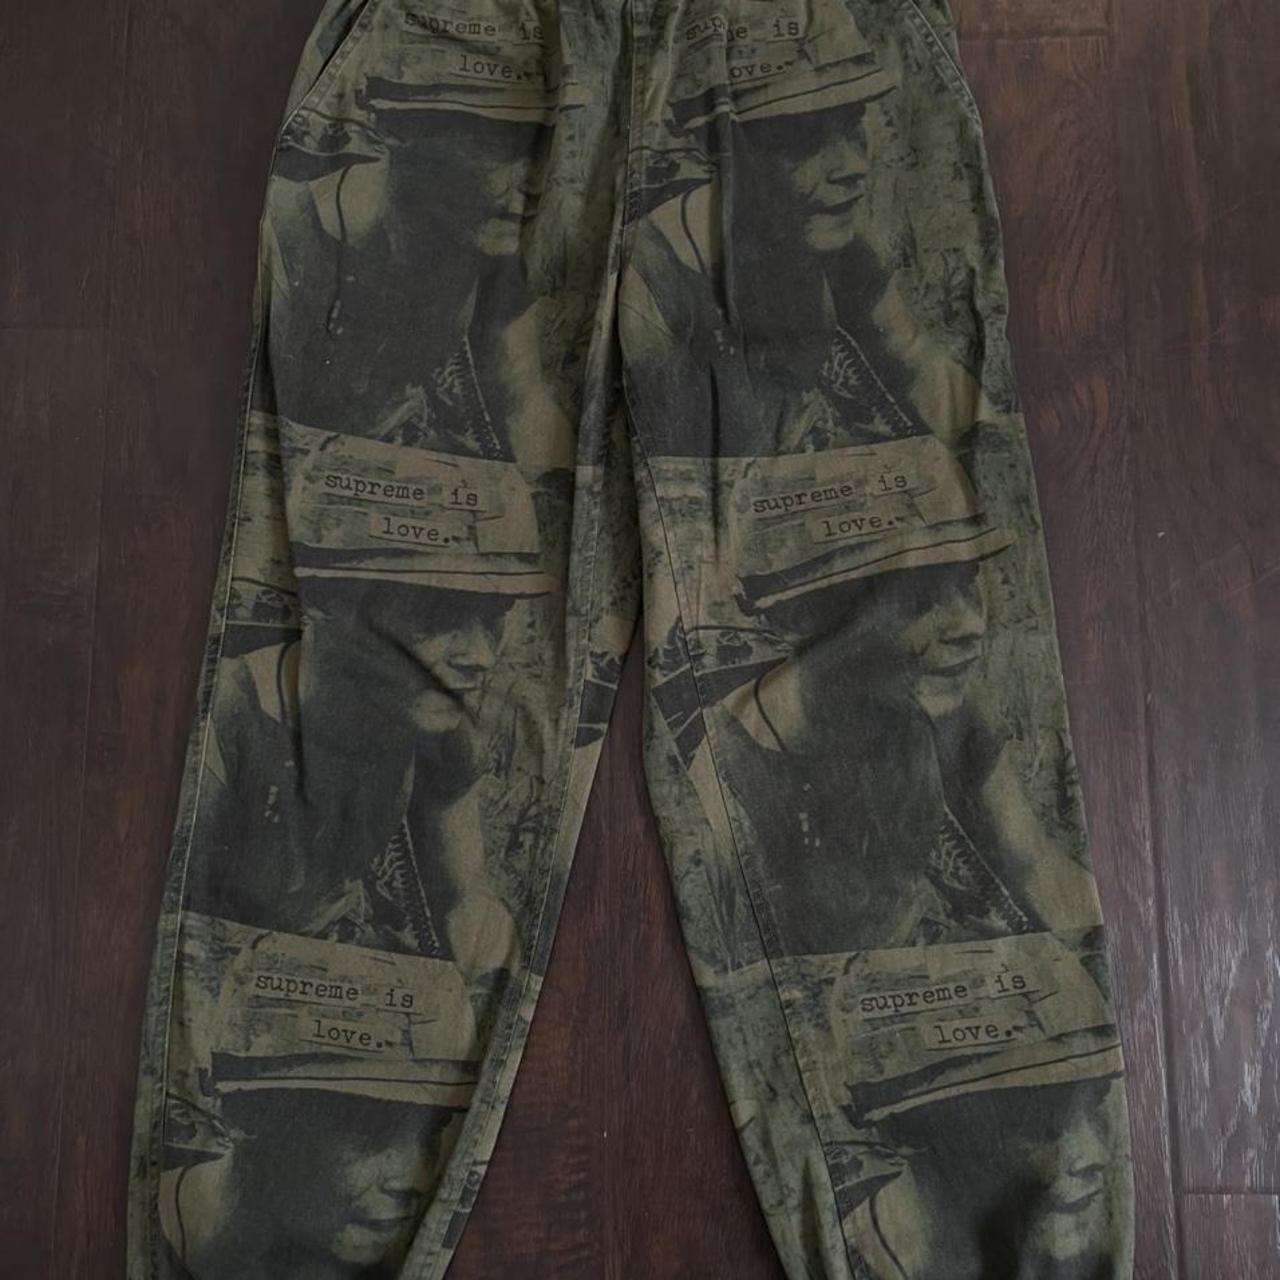 Supreme Is Love Skate Pant, Size Small, Brand New, Fits...